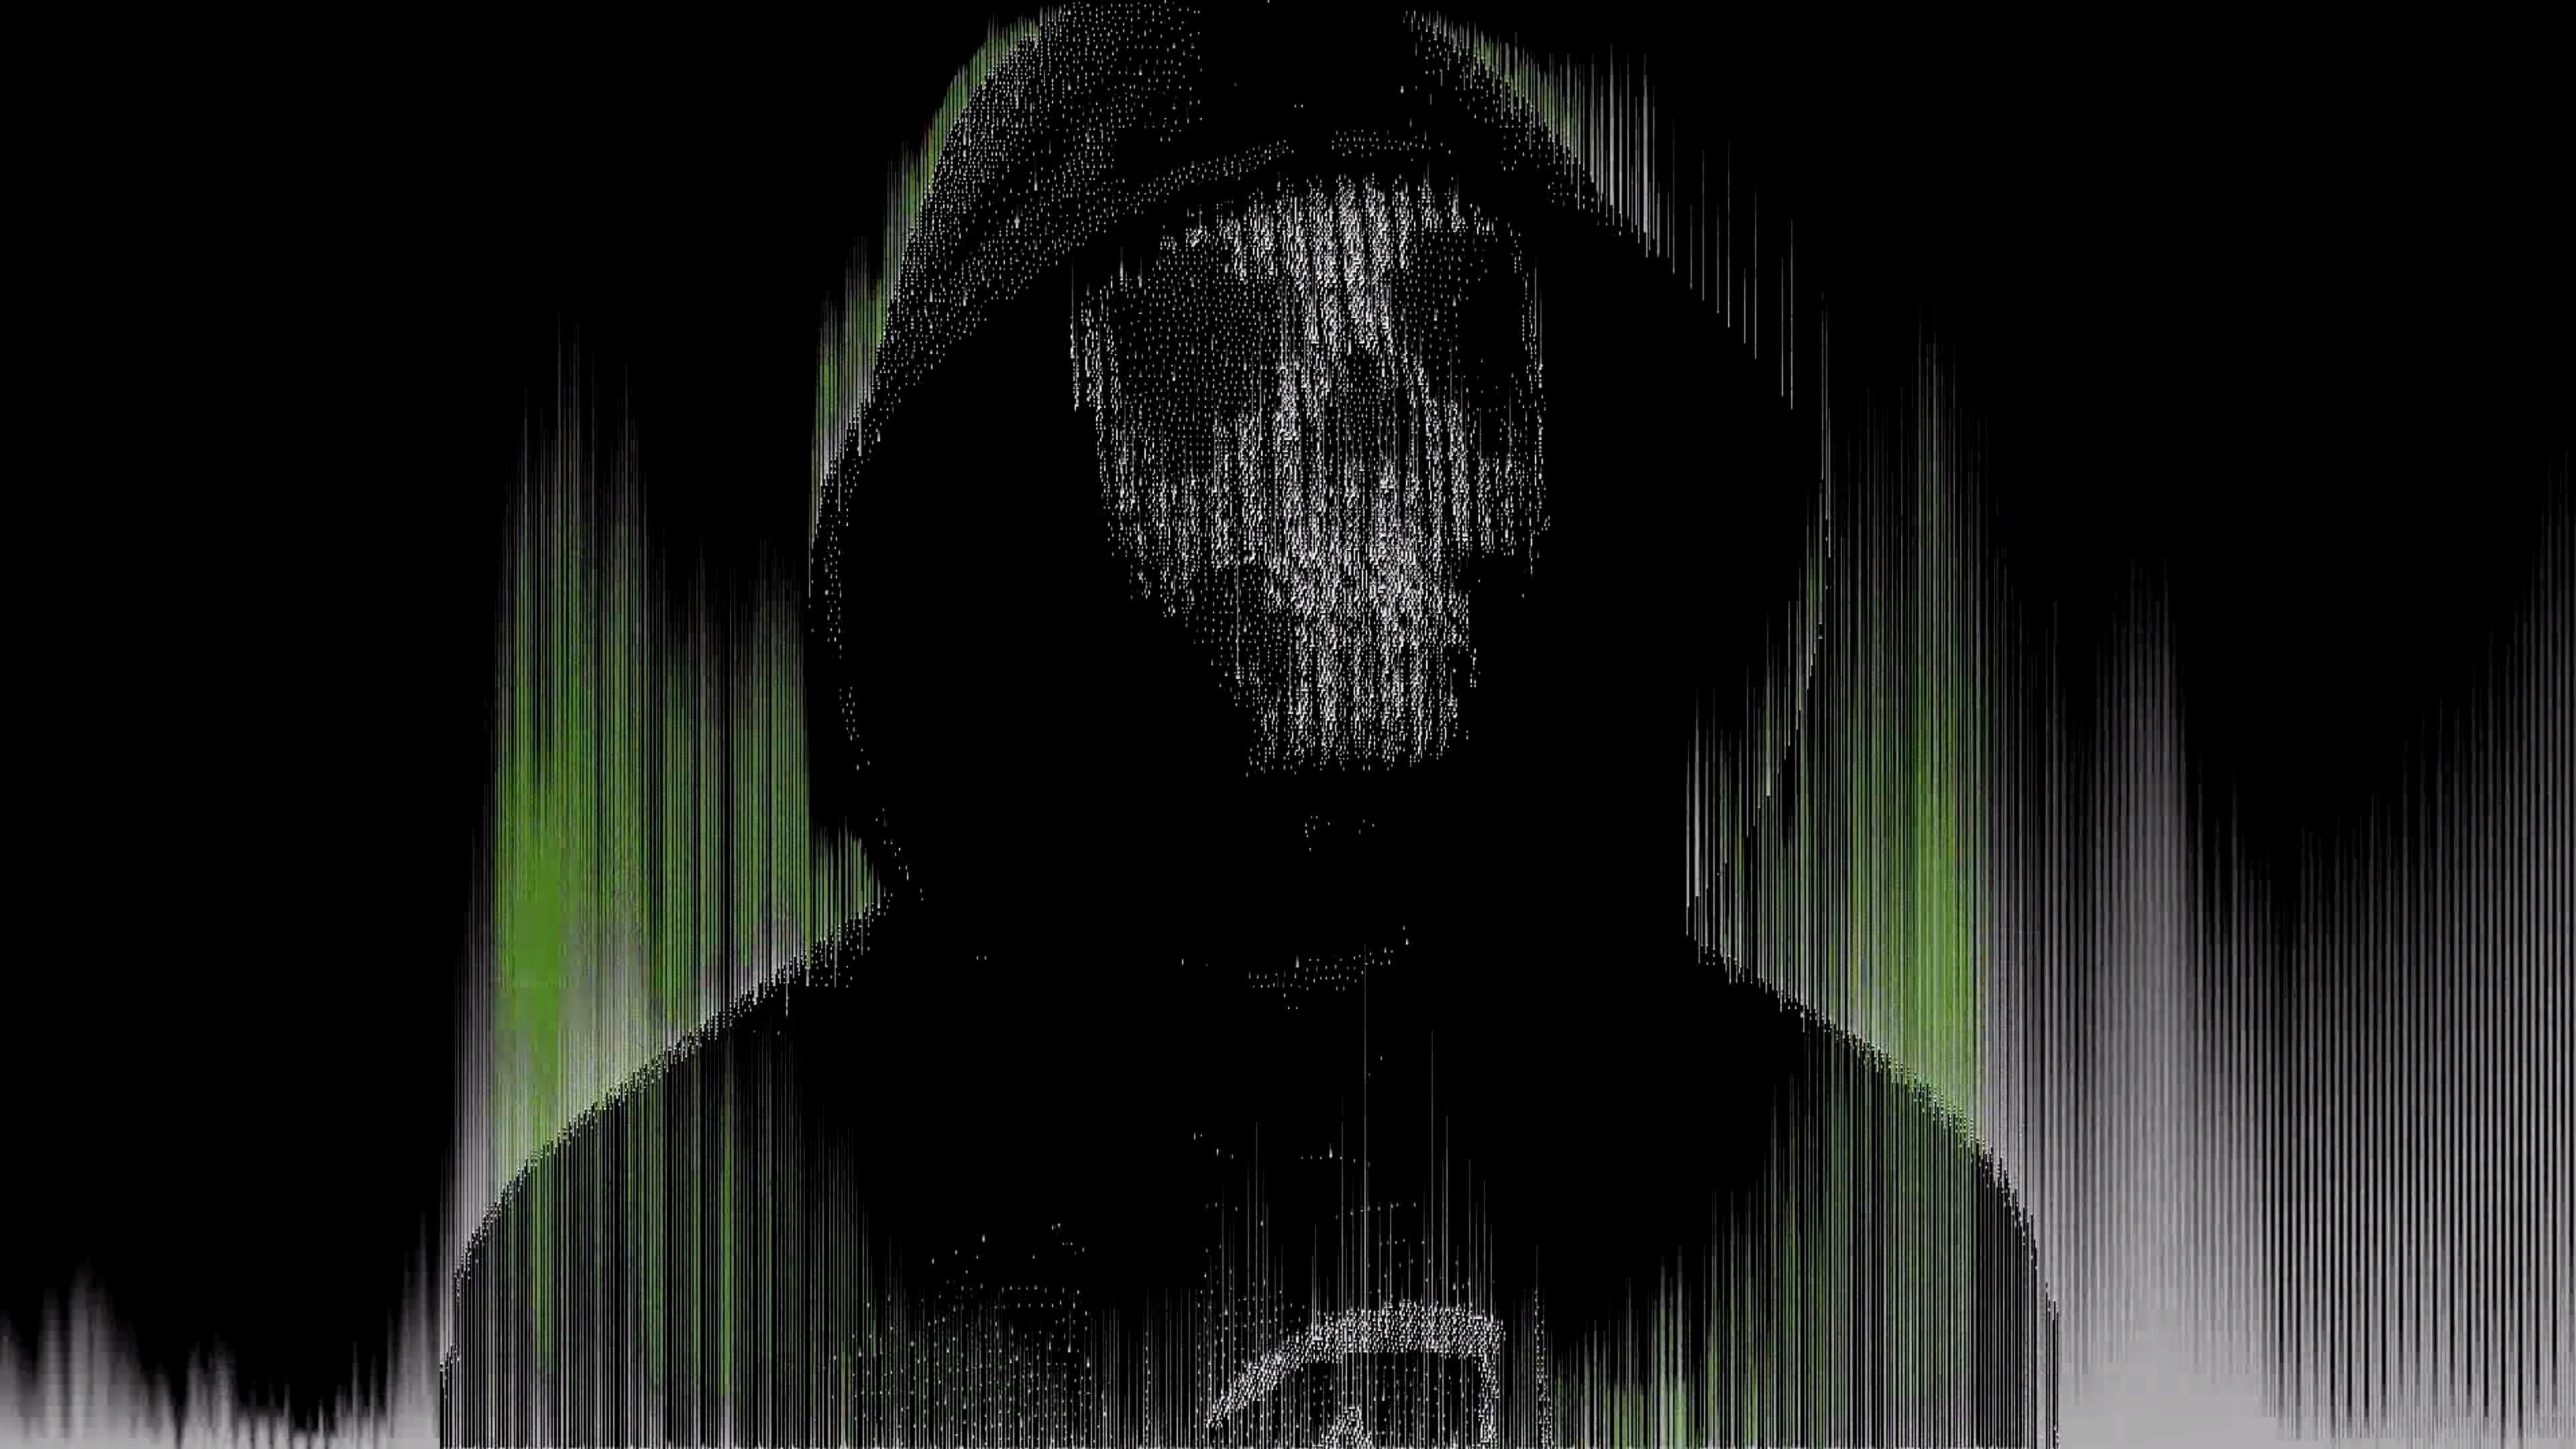 Hacking Wallpaper background picture